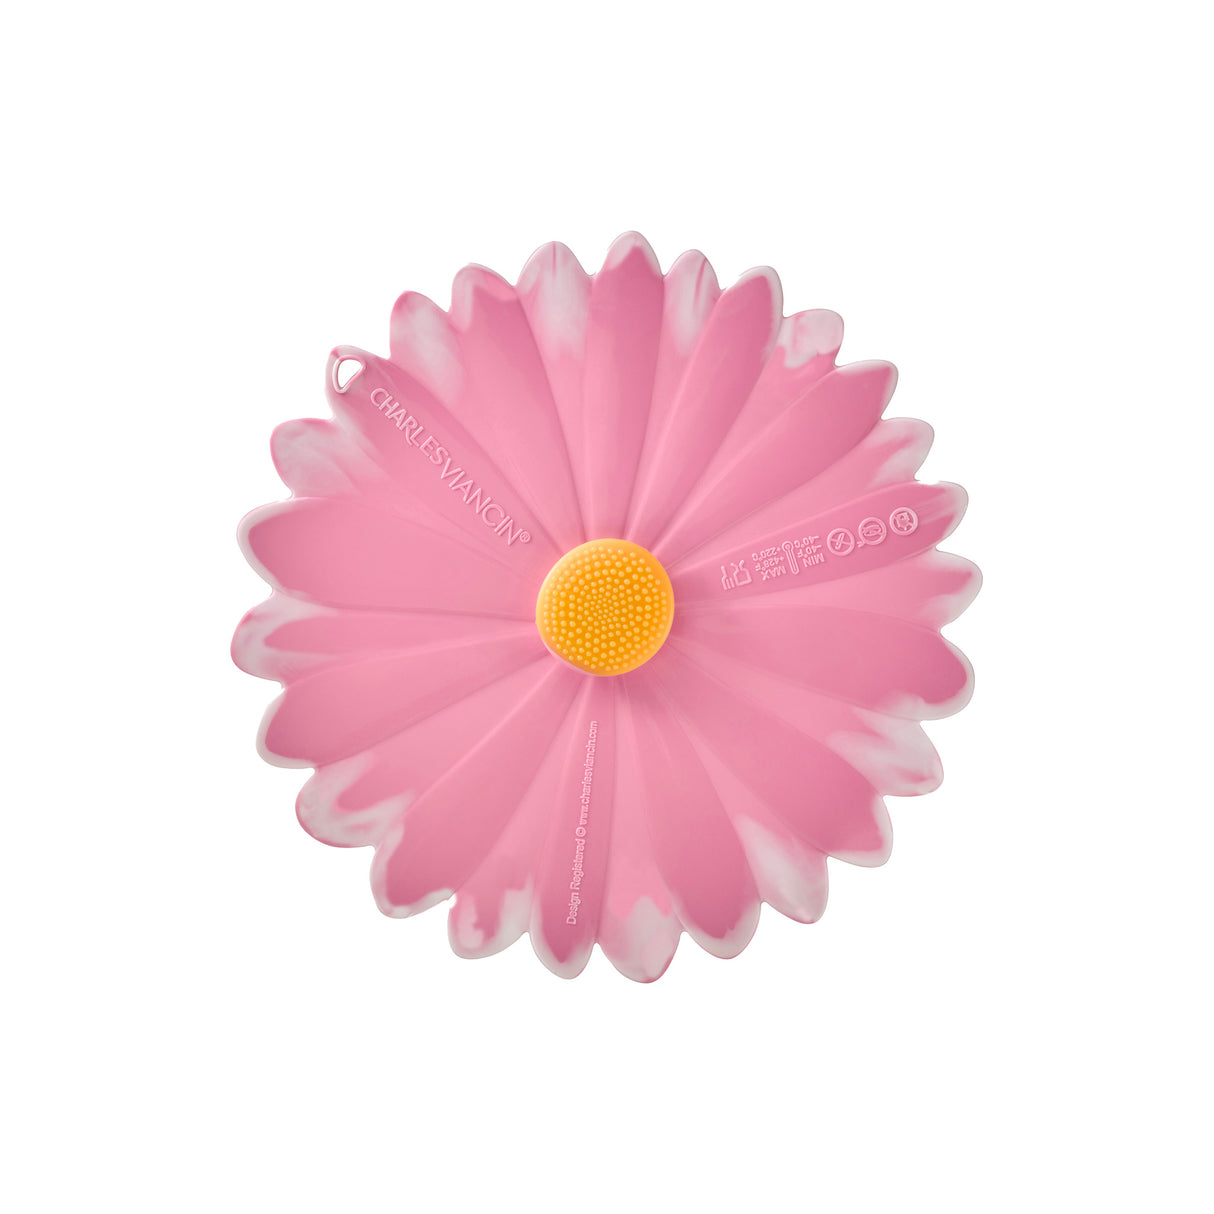 CHARLES-VIANCIN-2513-DAISY-LID-8-PINK-WHITE-SILICONE-TOP.jpg